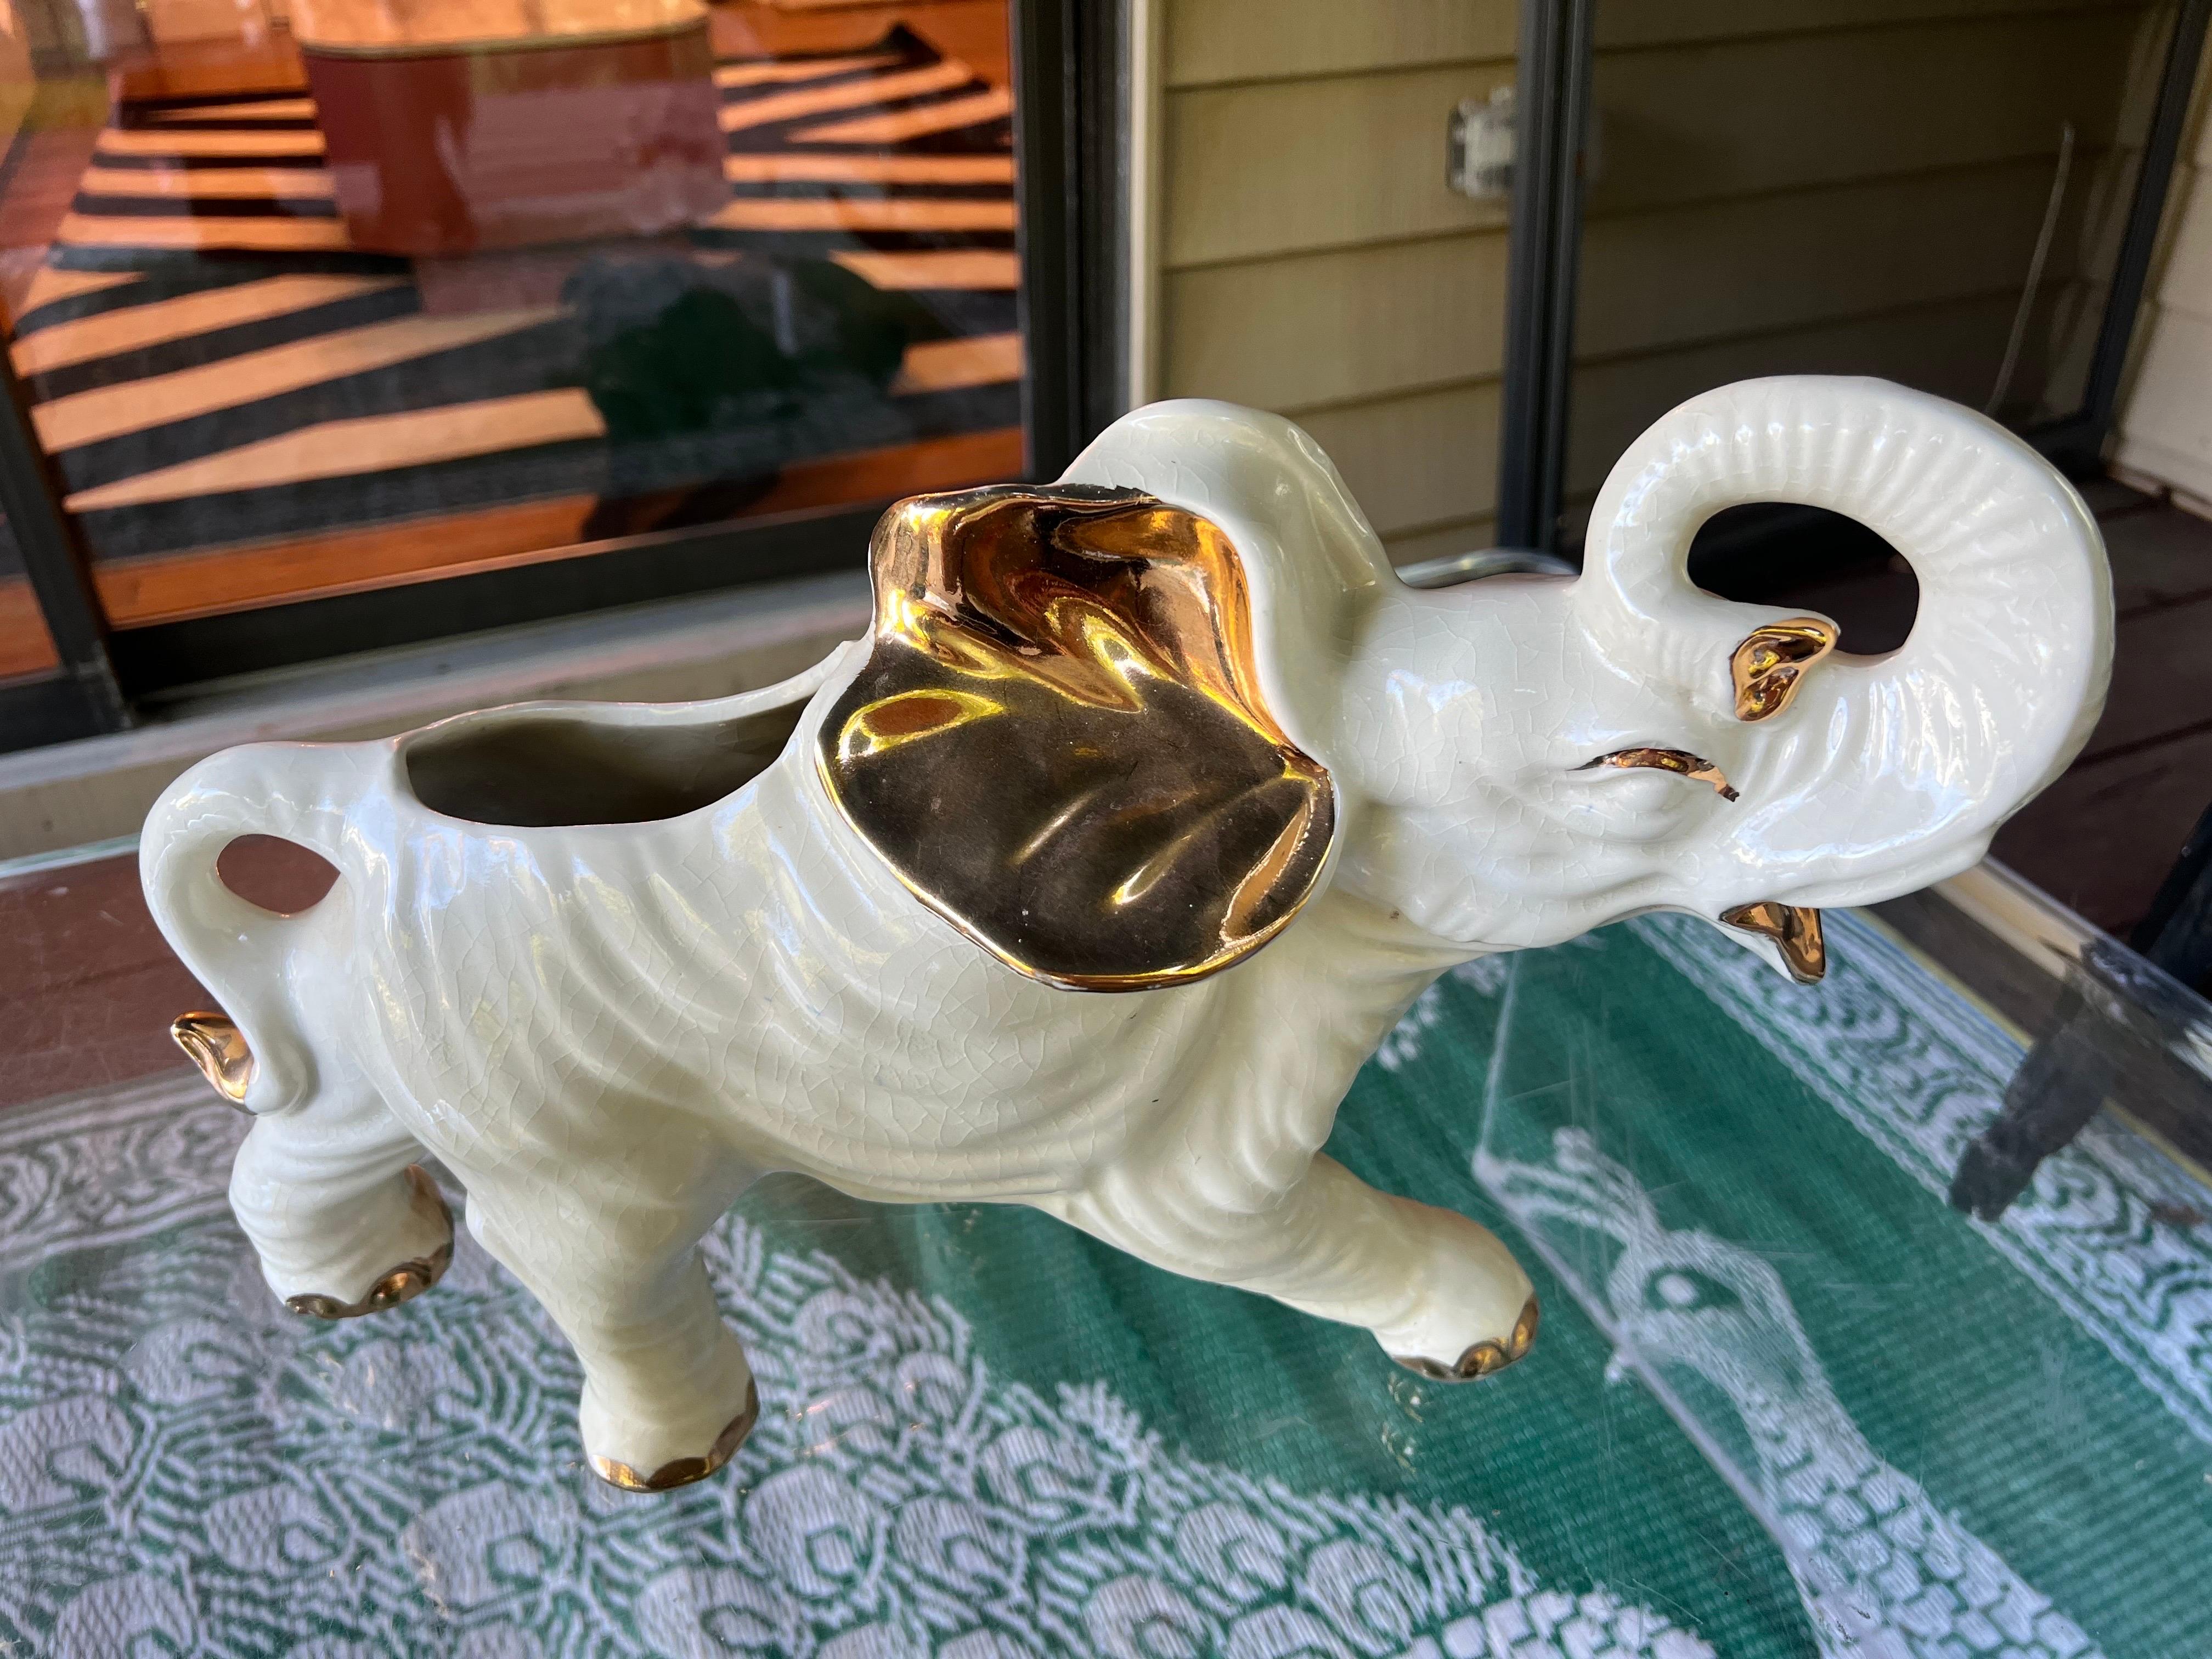 For your consideration is this lovely white elephant ceramic planter most likely produced in Japan during the 1950s up to the 1970s. His features are outlined in gold.